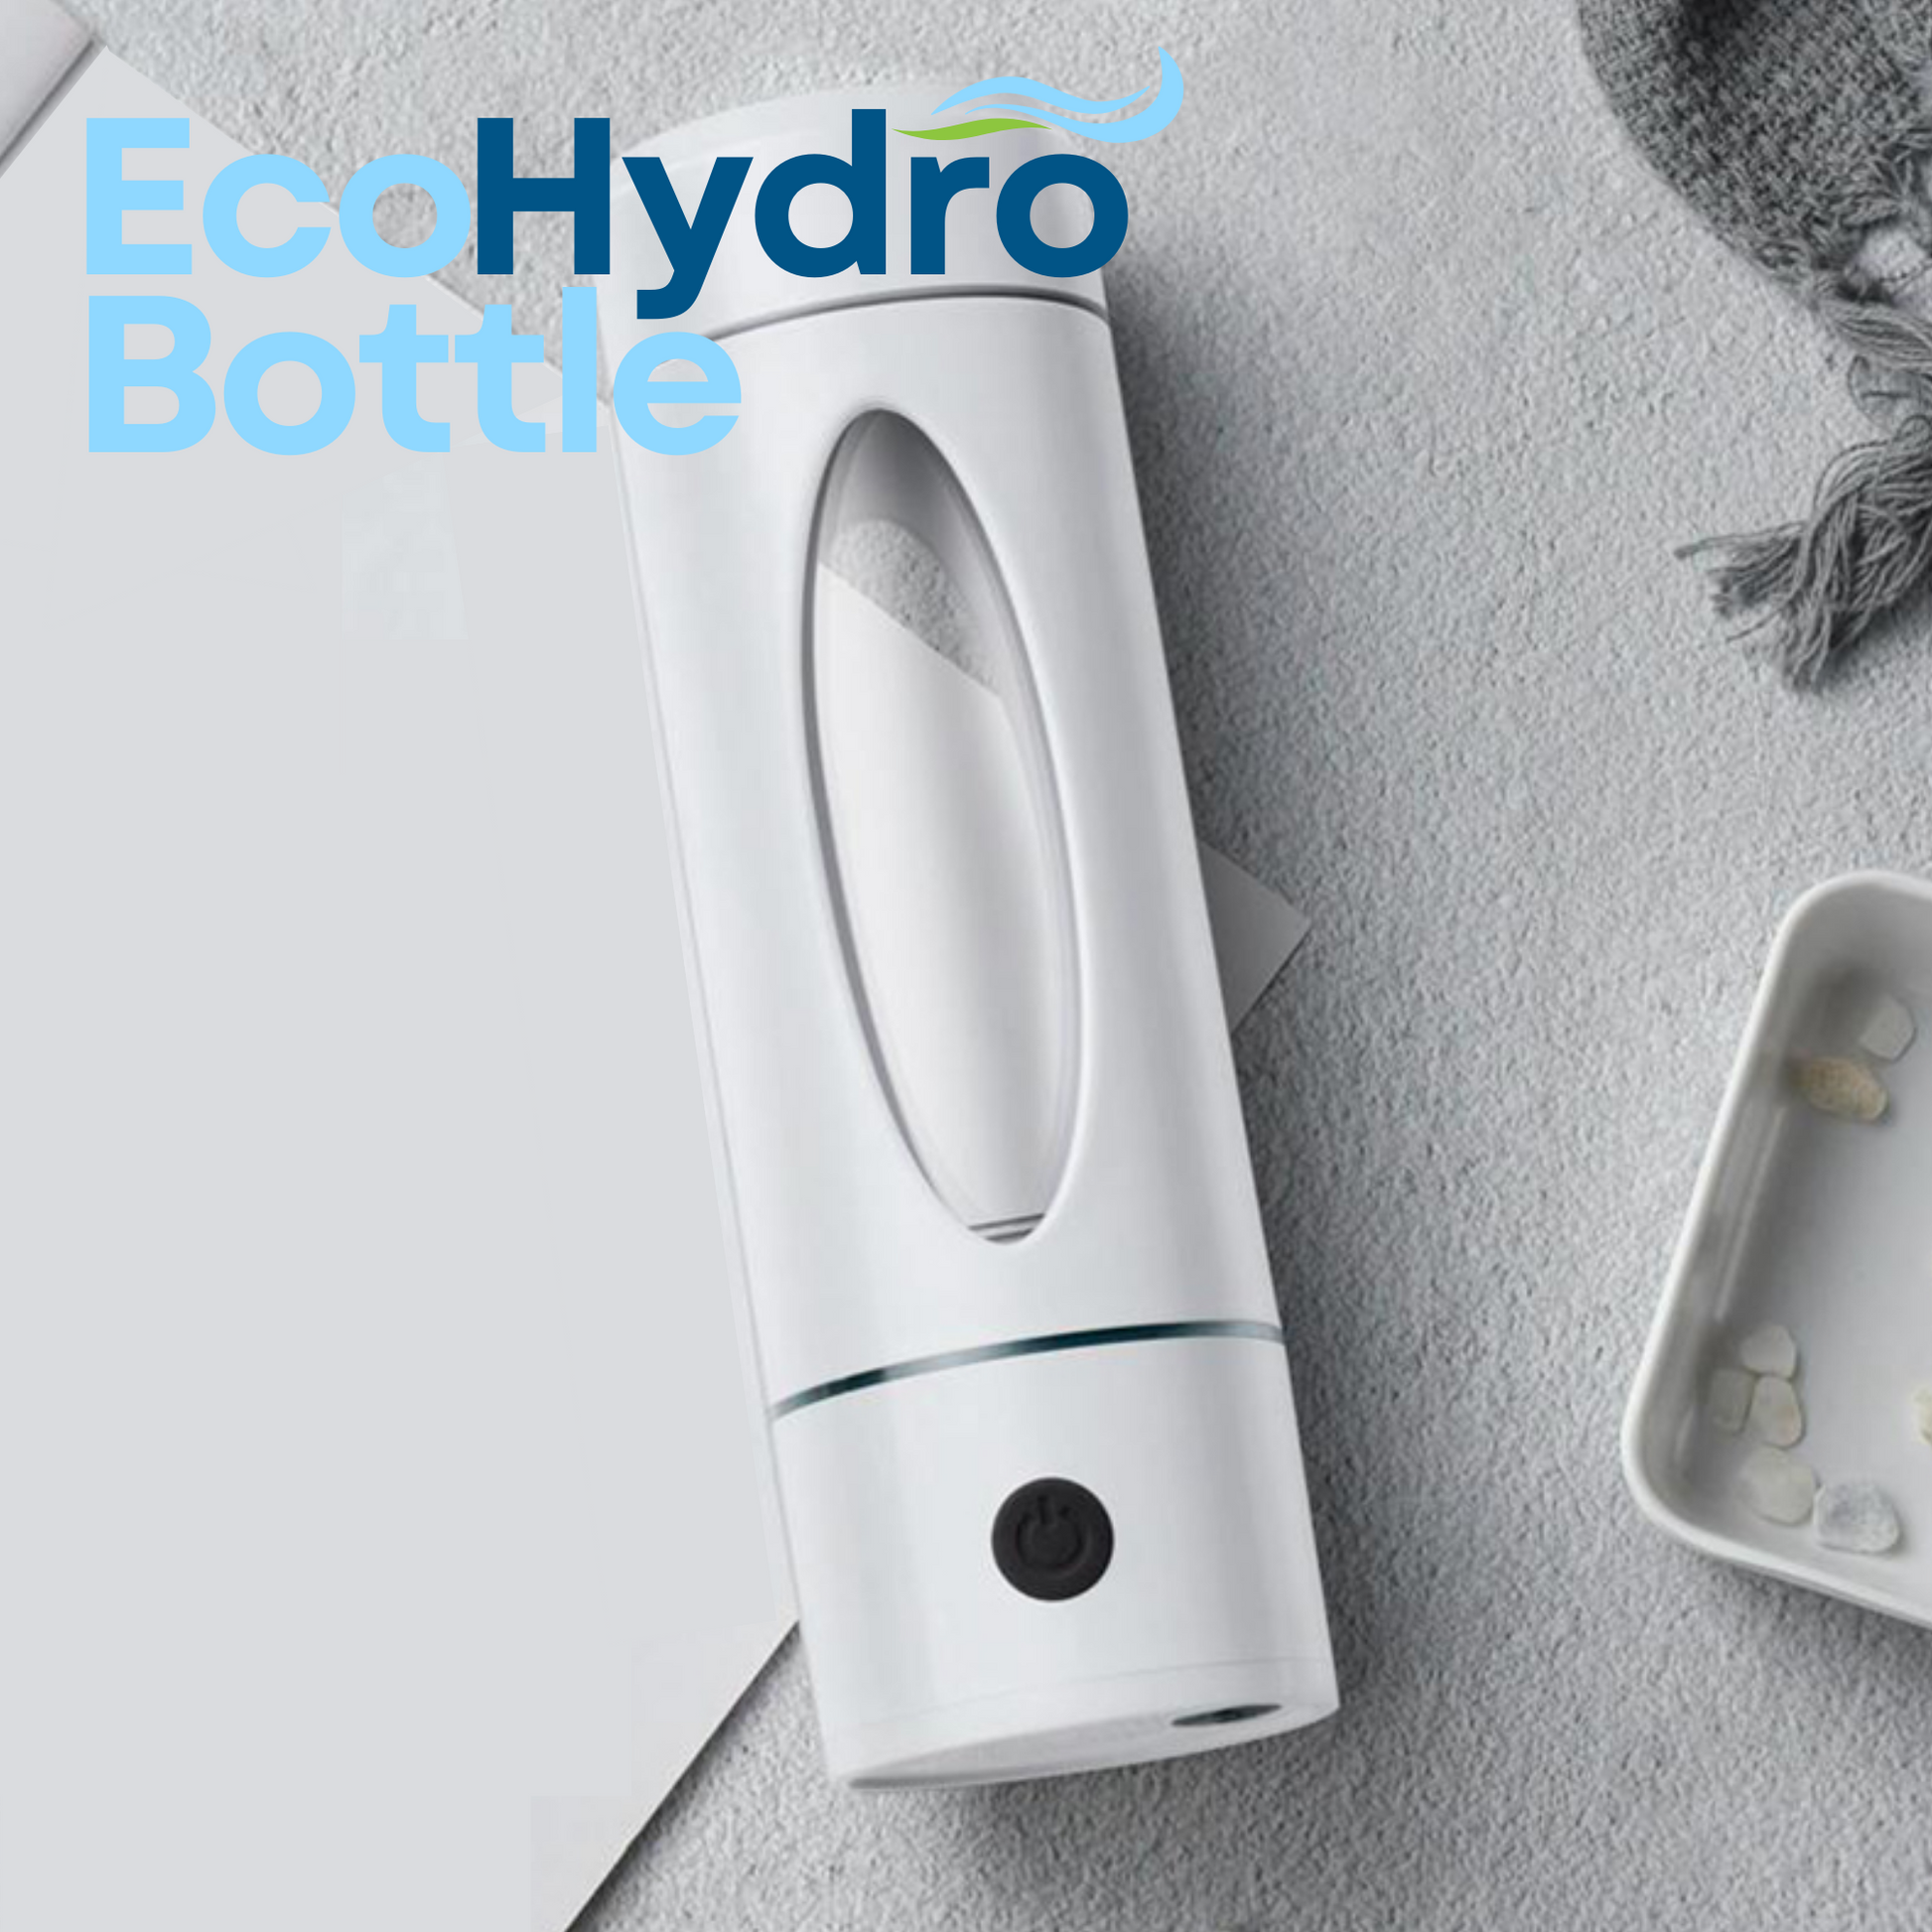 The EcoHydro Bottle - Hydrogen Rich Water For Health – EcoHydroBottle